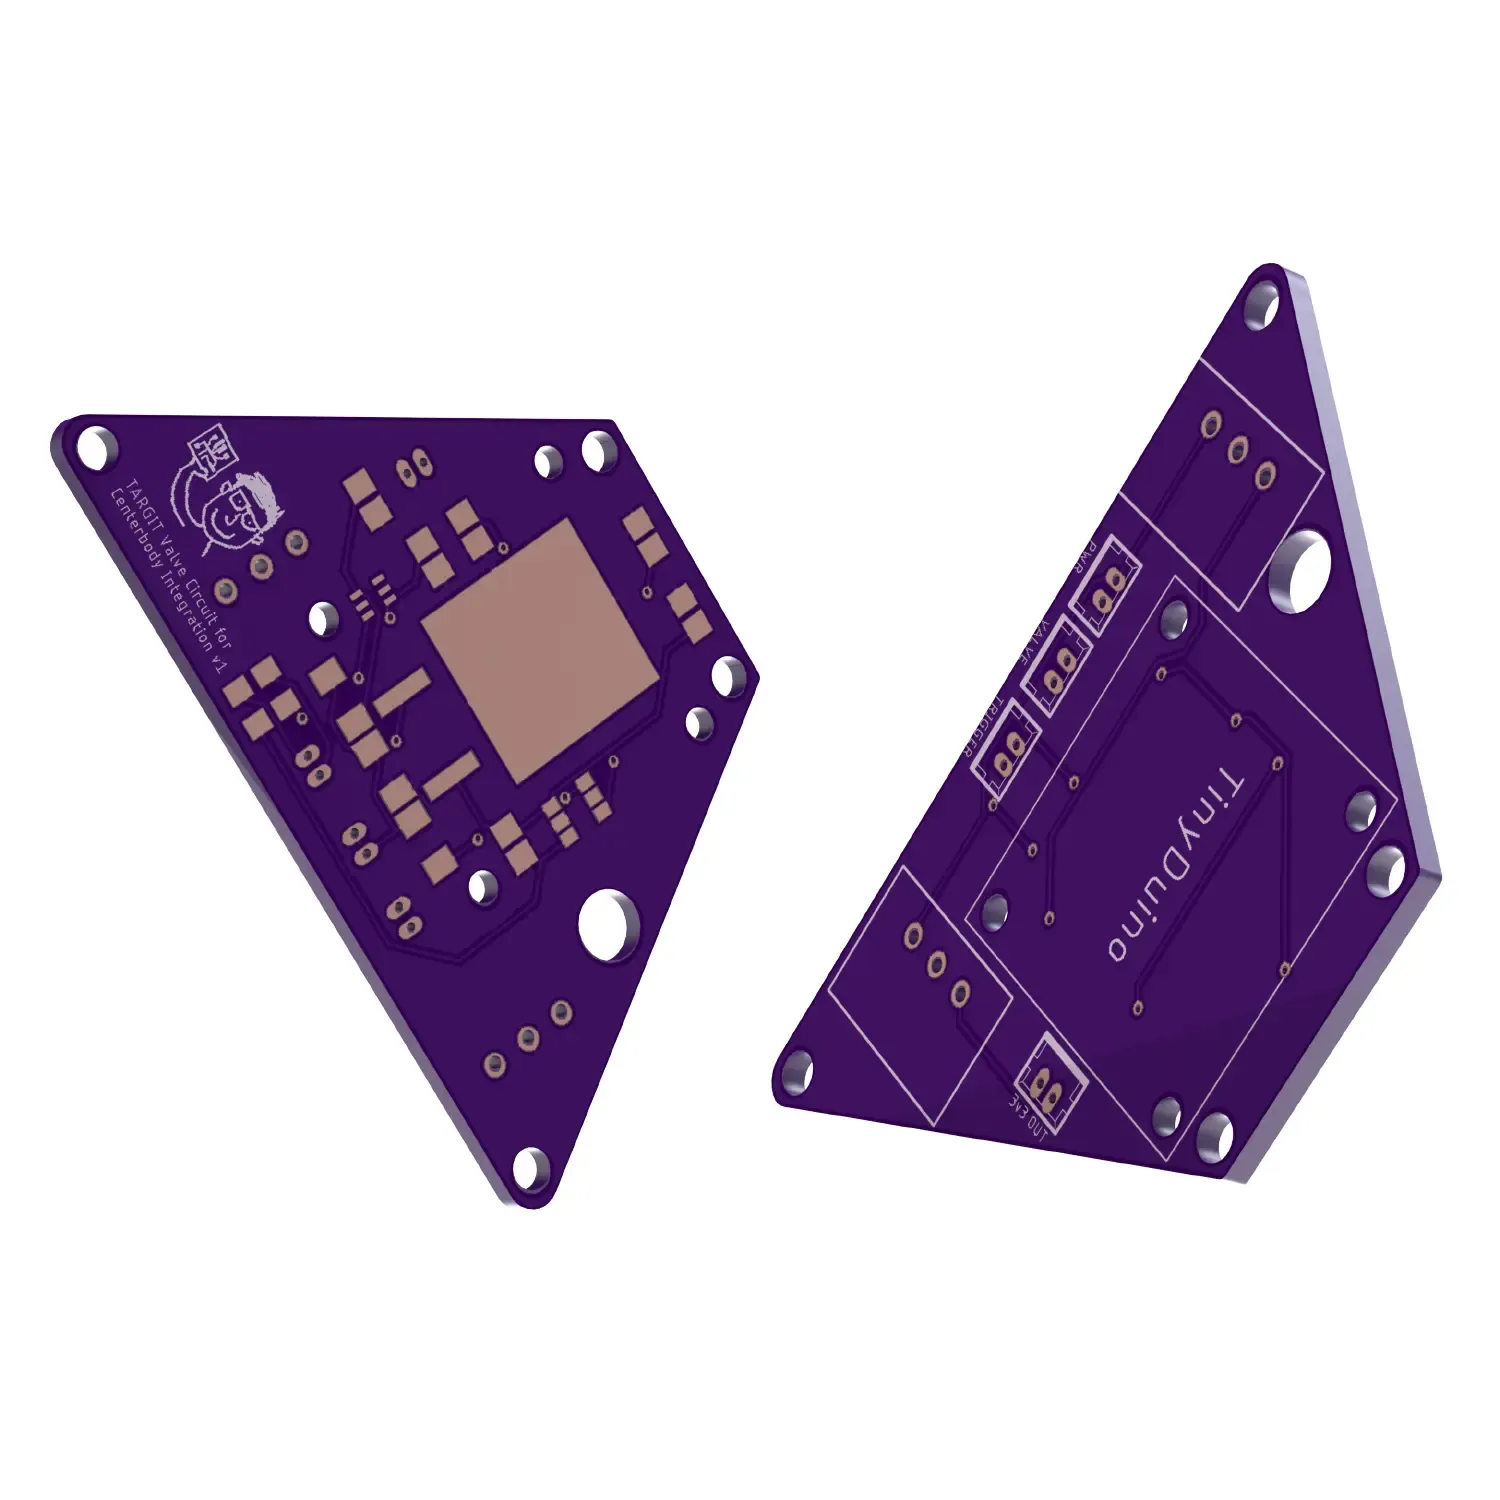 A render of a printed circuit board for a small satellite.